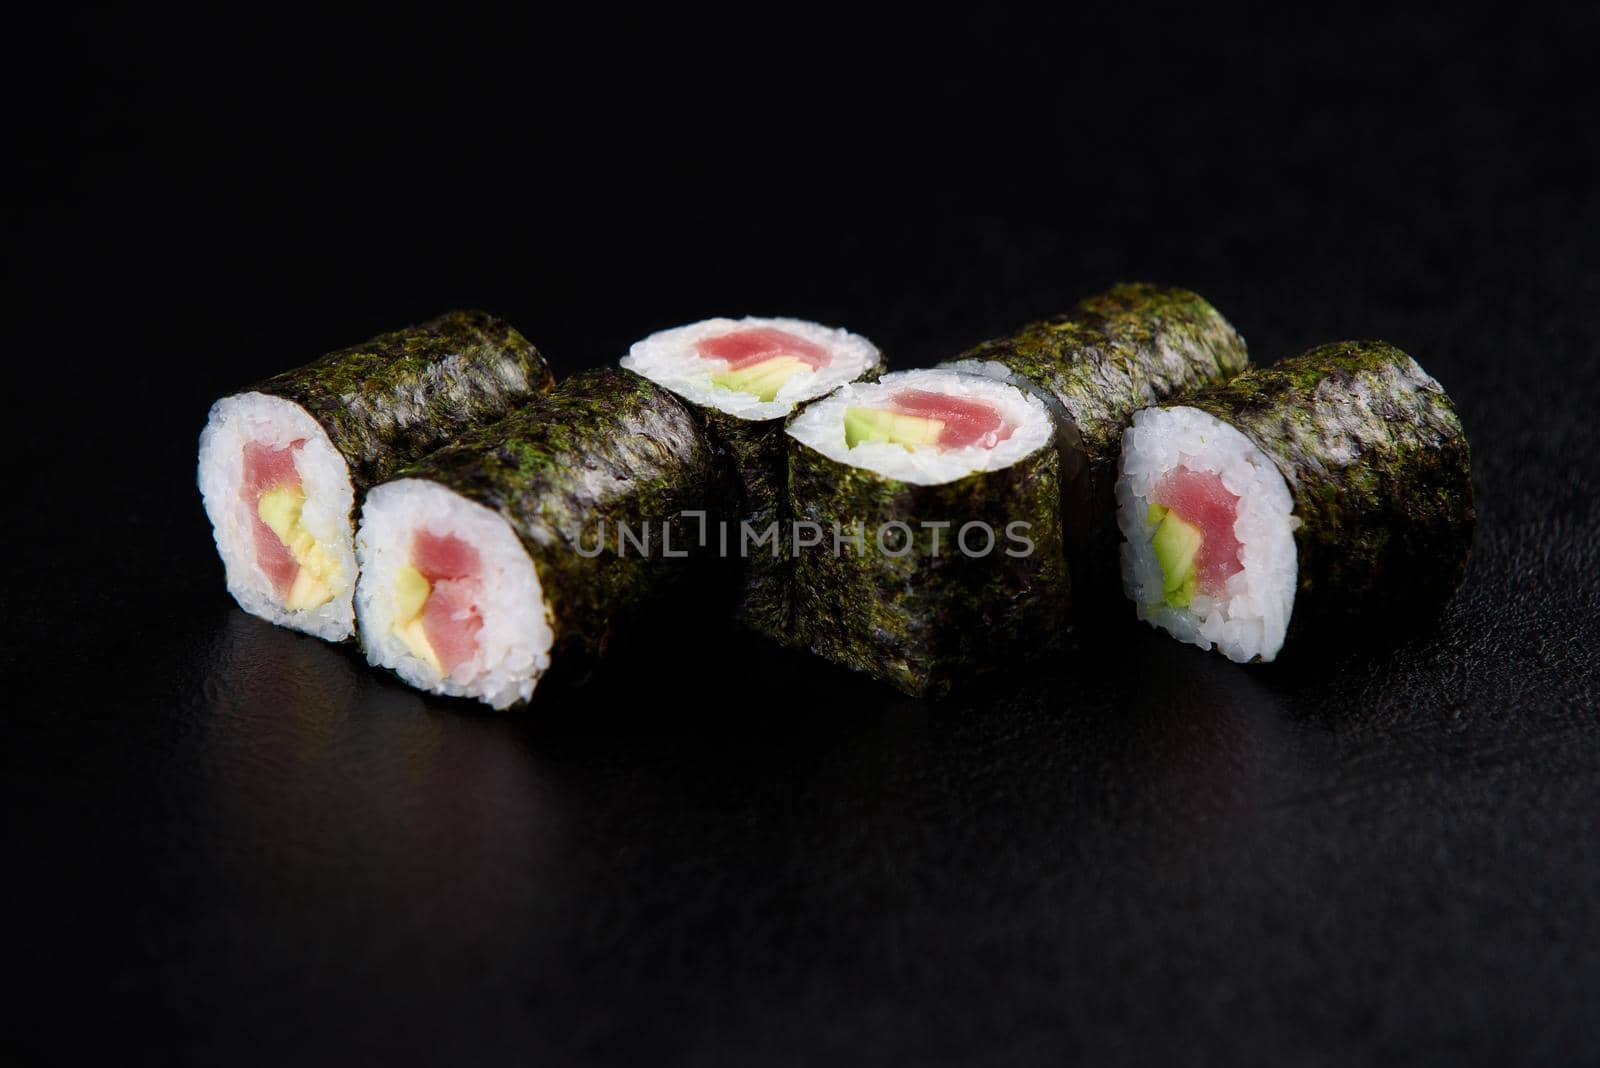 Sushi roll sea food on black background. Sushi delivery from the restaurant. Fresh delicious Japanese sushi with avocado, cucumber, shrimp and caviar on dark background